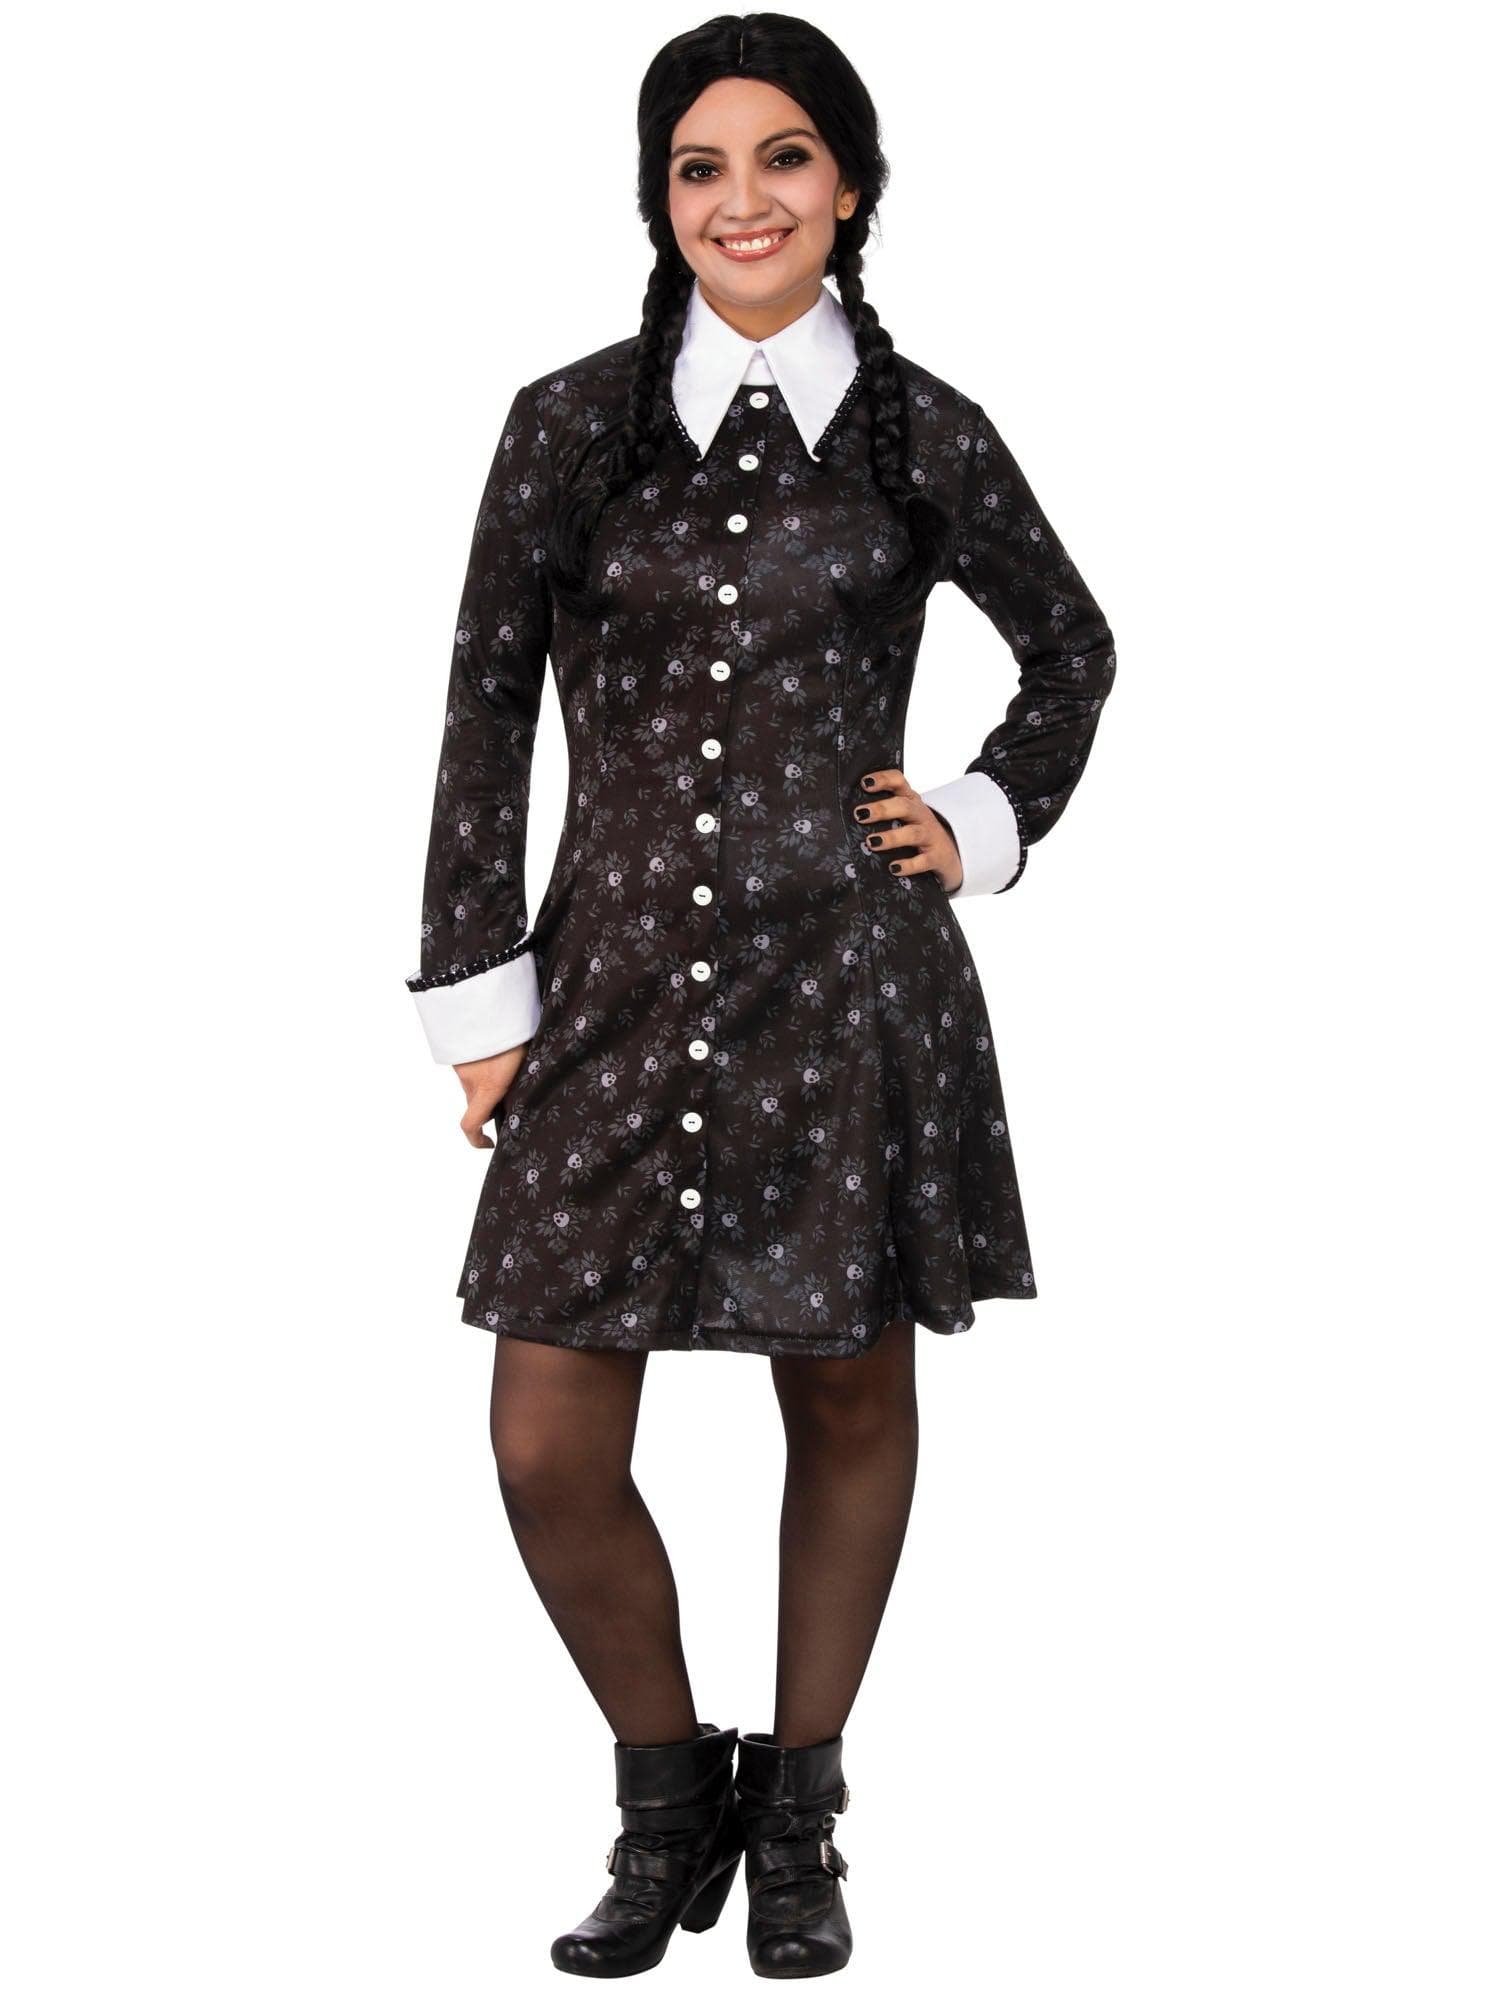 Adult Addams Family Wednesday Costume - costumes.com